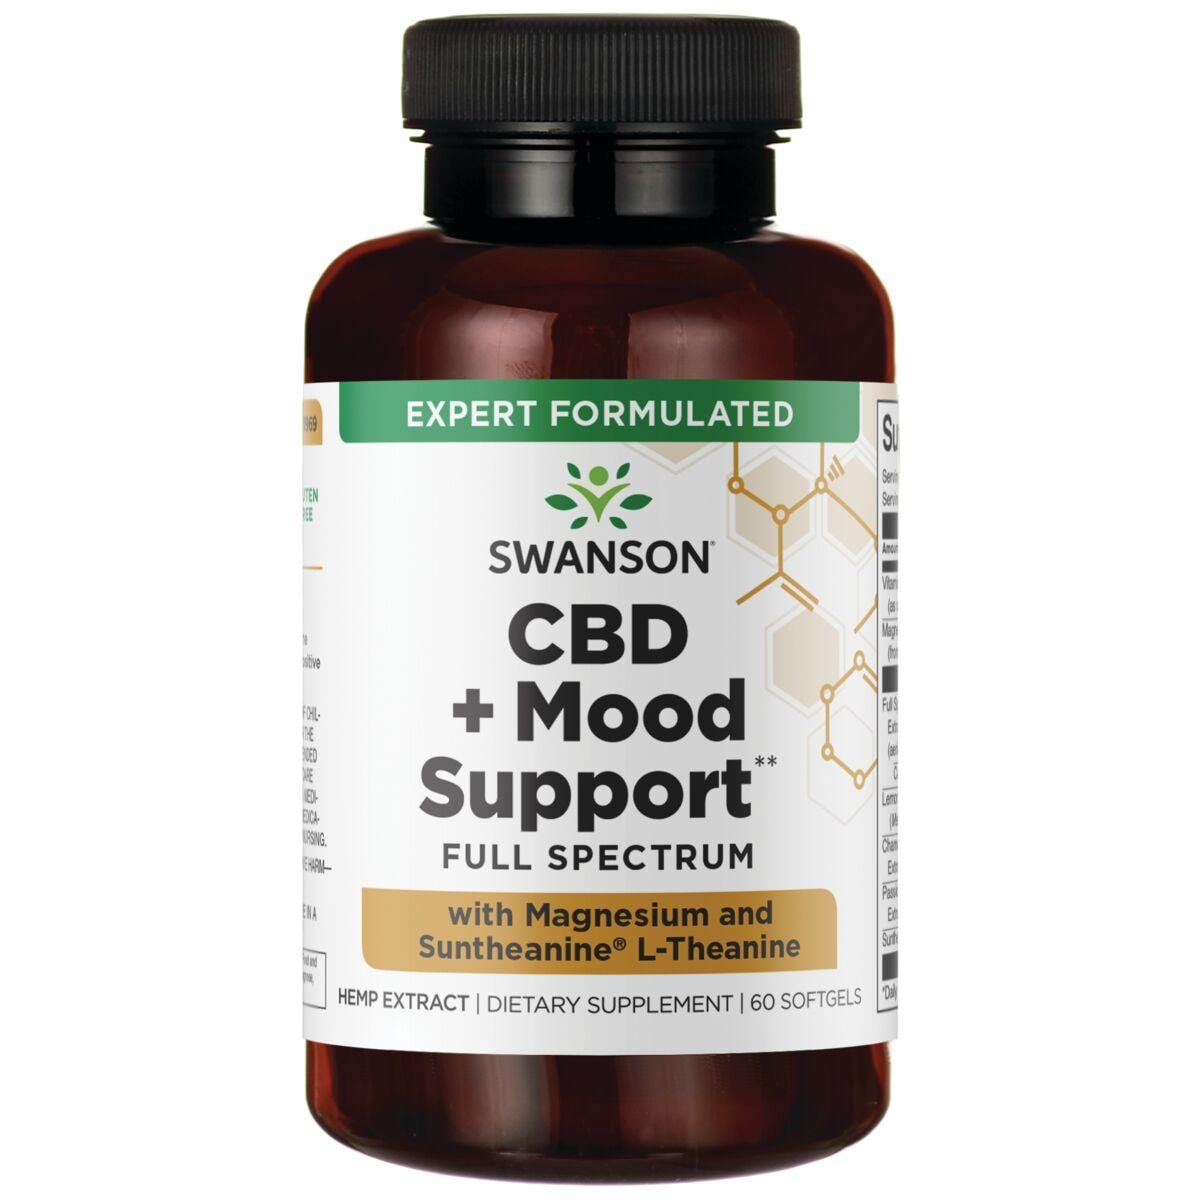 Swanson Premium Cbd + Mood Support - with Magnesium and Suntheanine L-Theanine Supplement Vitamin 15 mg 60 Soft Gels